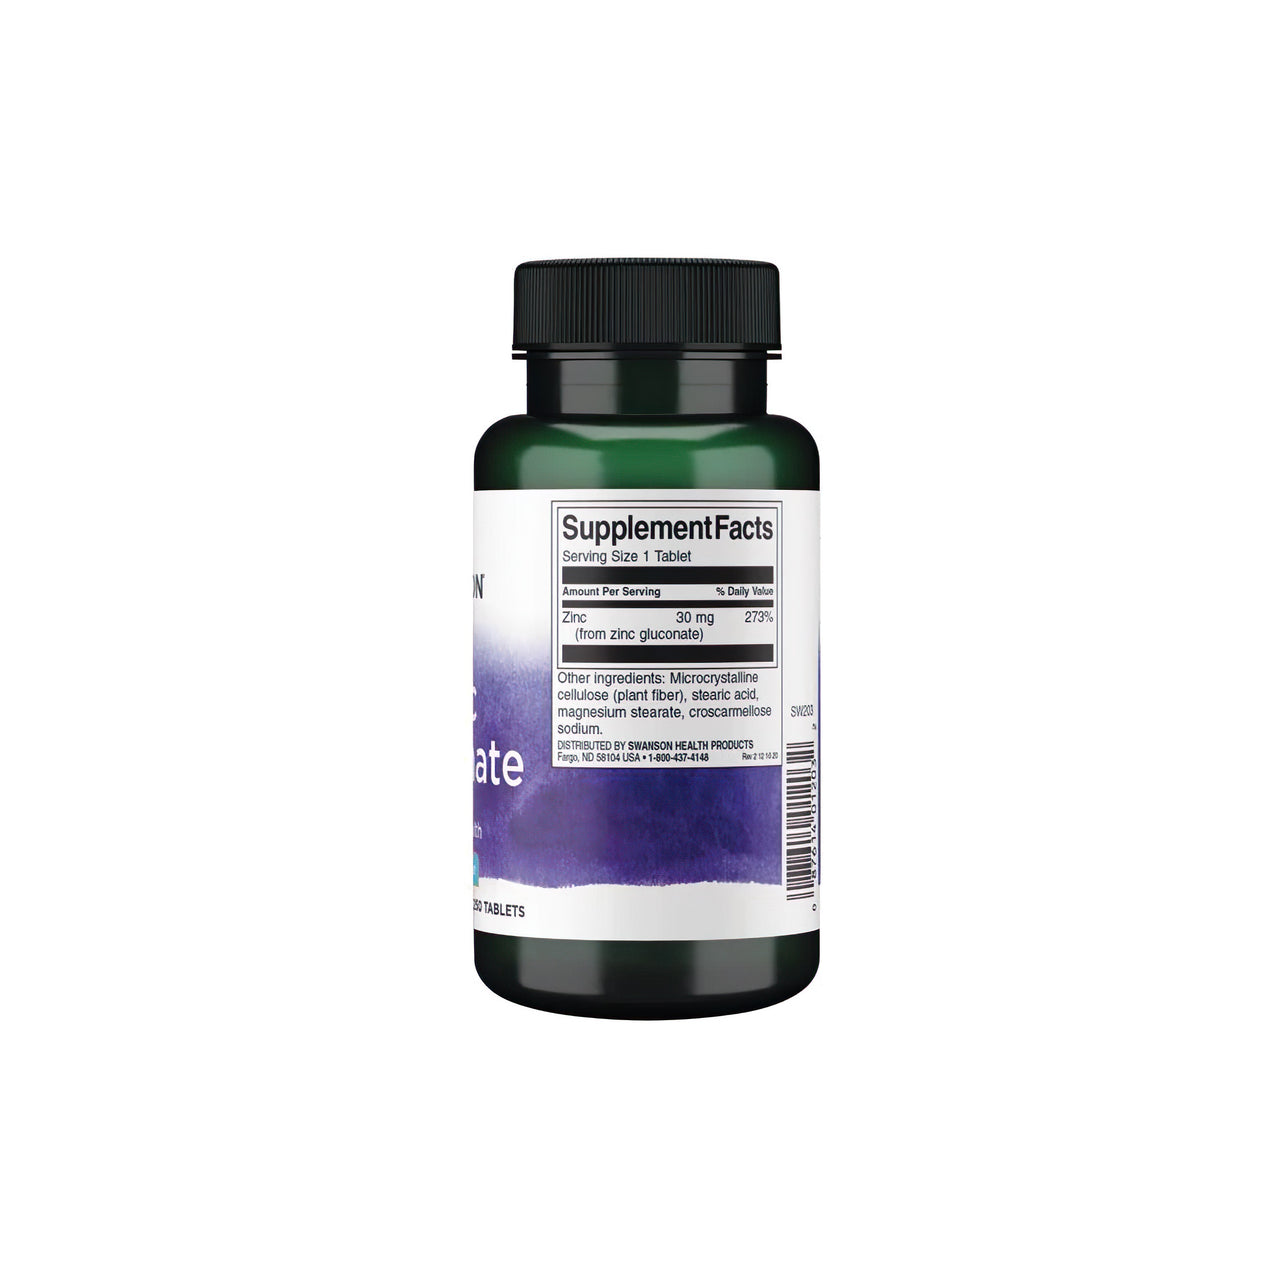 A dietary supplement bottle of Swanson Zinc Gluconate 30 mg 250 tab on a white background.